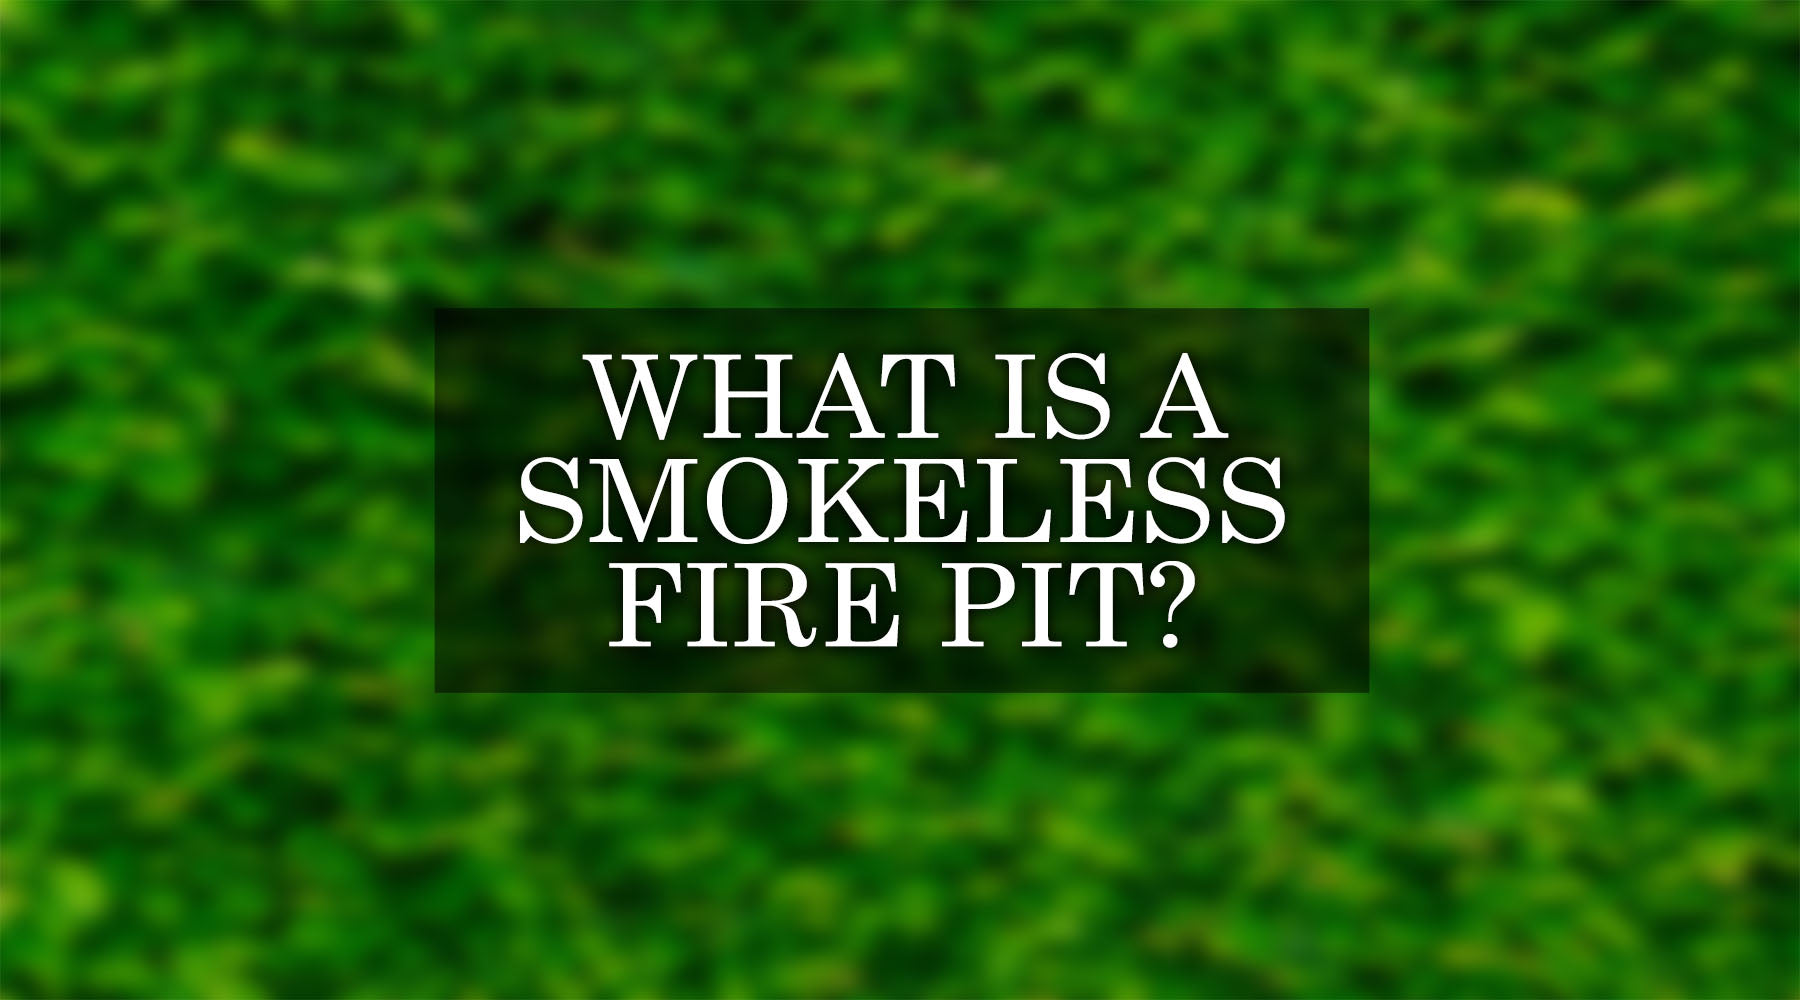 Everything About Smokeless Fire Pits: How They Work, Pros and Cons, and More